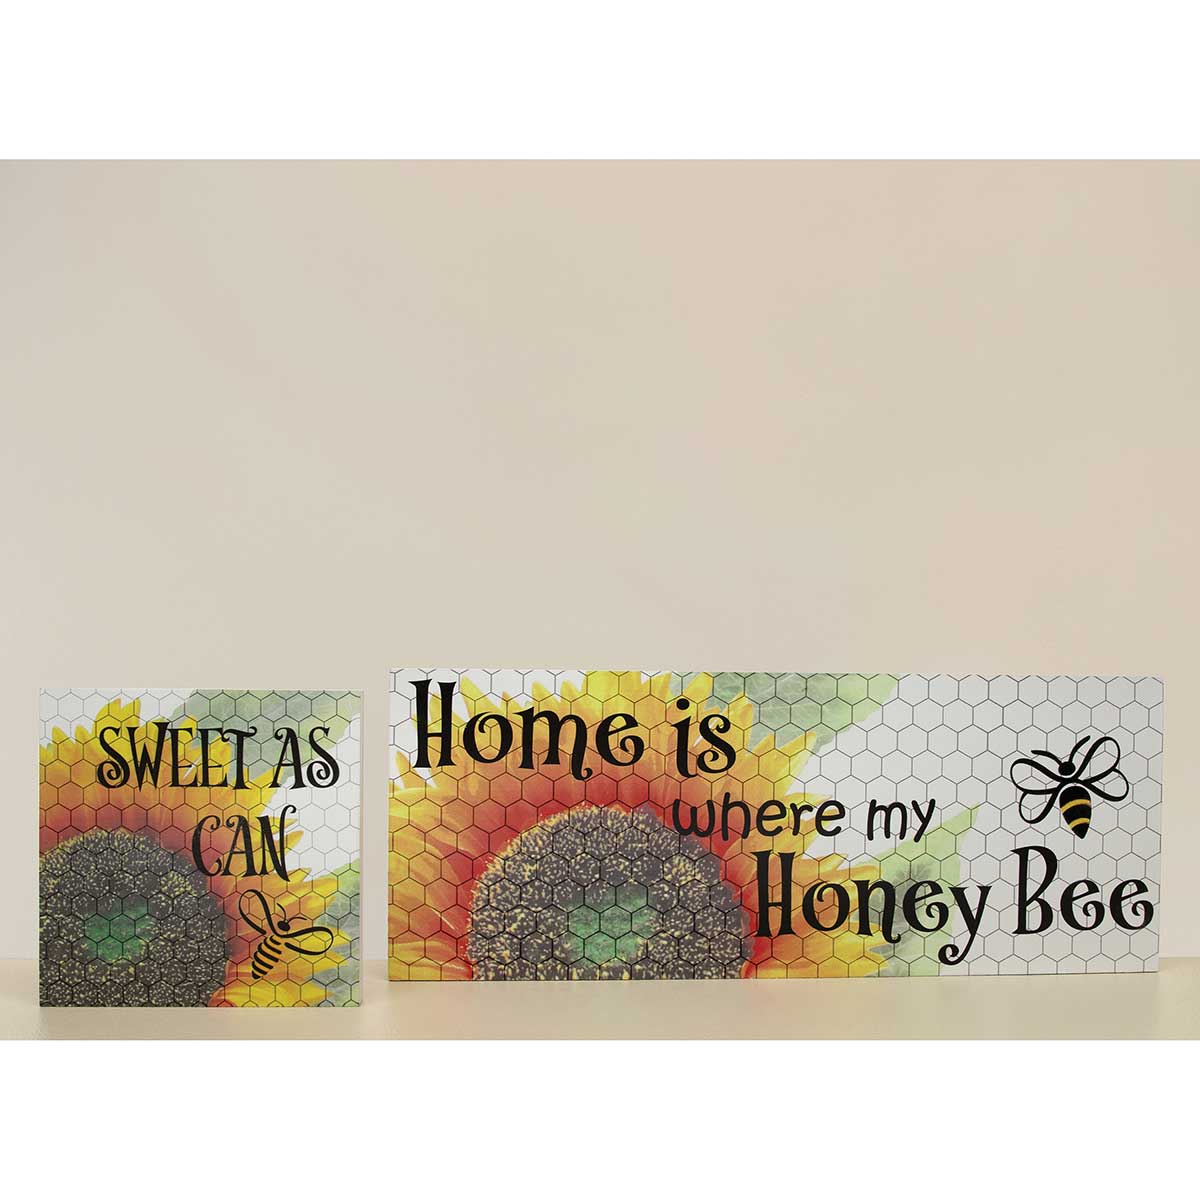 b50 SIGN HOME WHERE MY HONEY BEE 18.25IN X .75IN X 7.5IN